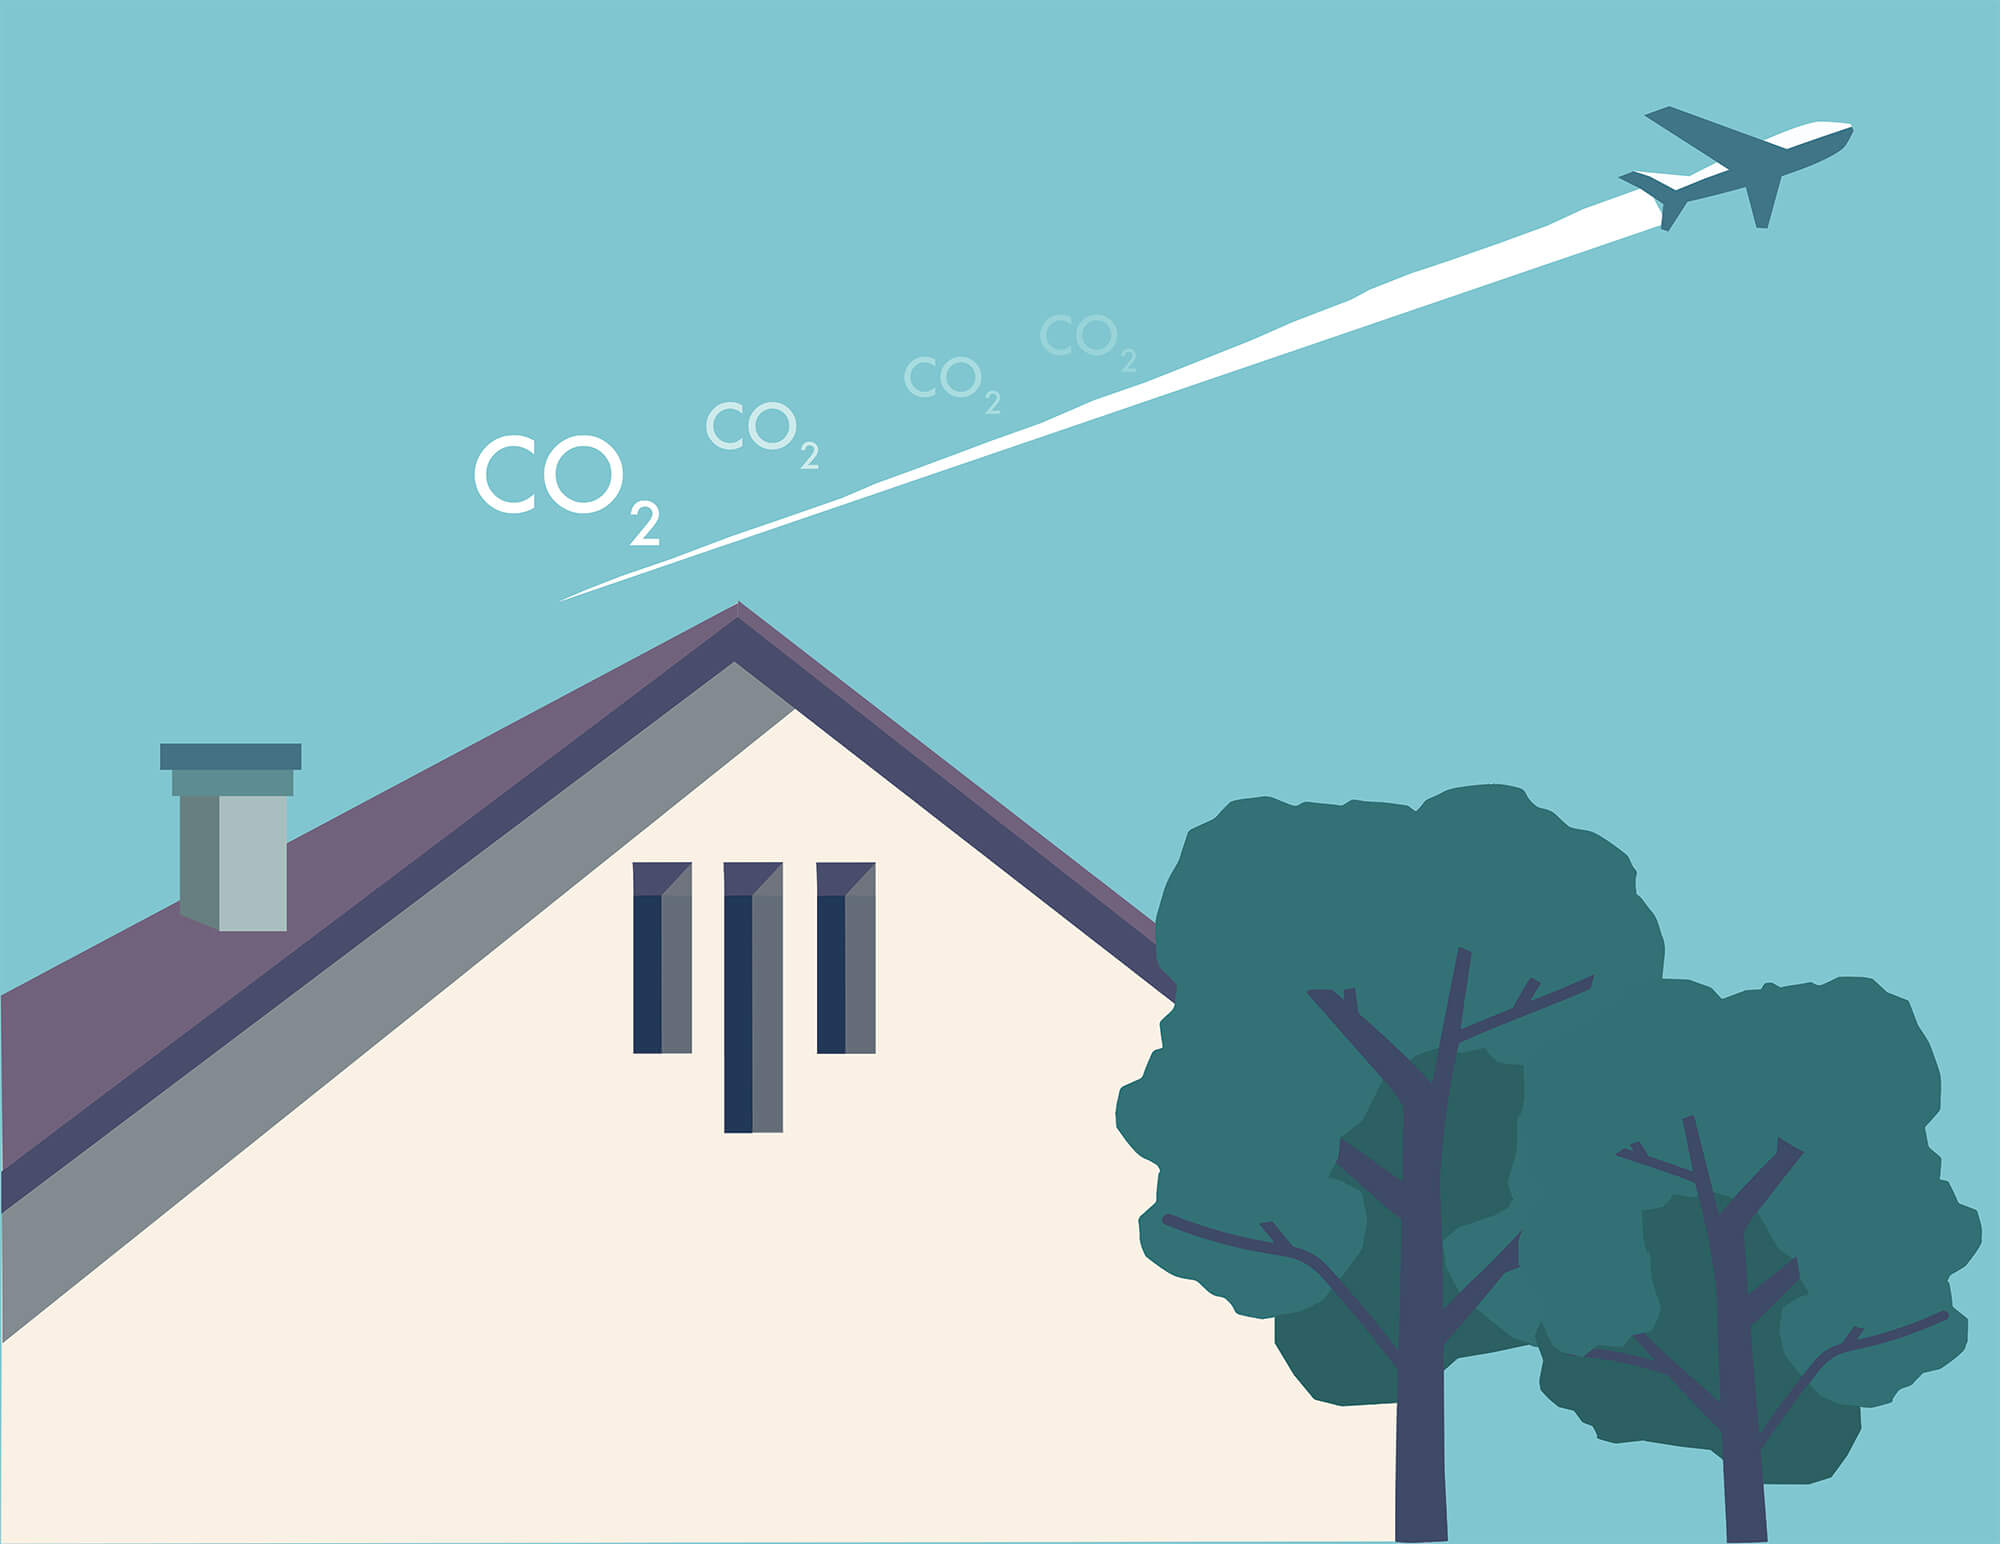 In this illustration, an airplane can be seen flying above a residential house, with carbon dioxide emissions left behind as it flies over head.